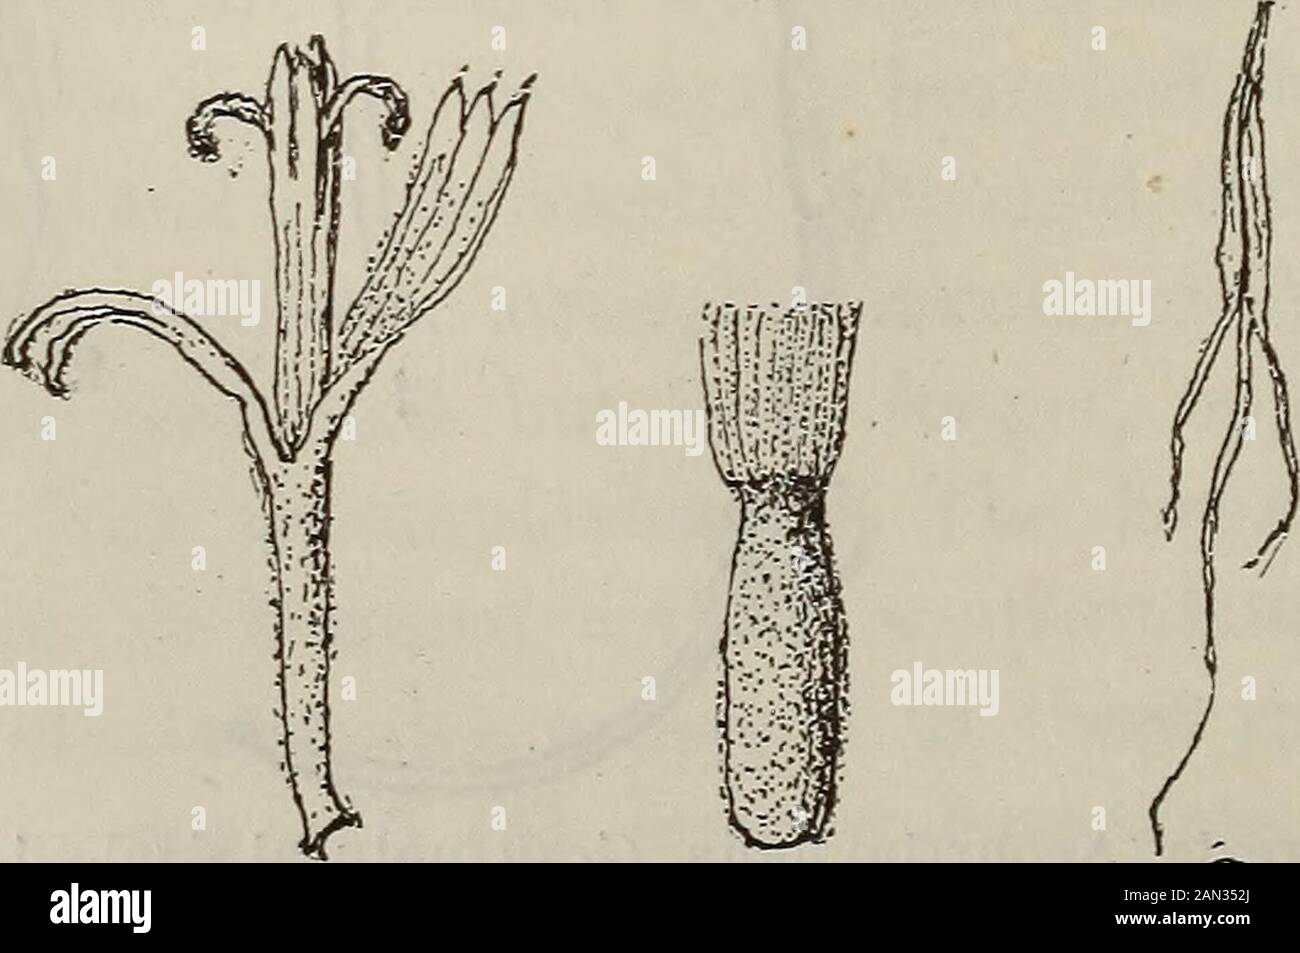 American journal of pharmacy . G 7 8 Perezia(Acourtia) Wrghtii, Gray.—1. Leaf (nat, size). 2. Flower head (nat. size),With bases of cut pedicels. 3. Root Q4 nat. size). 4. Root deprived of the woollycovering. 5. Floret (nat. size). 6. Corolla. 7. Akene. 8. Stamens (magnified). Am. Jour. PharmApril, 1884. Pipitzahoic Acid and Species of Perezia. 191 towards the apex. The akenes are whitish, glandular, puberulent,cylindrical, and have a pappus of copious hairs. The root of a slightly bitter and astringent taste, imparts to strongalcohol a dingy yellow tint, which by the addition of a weak soluti Stock Photo